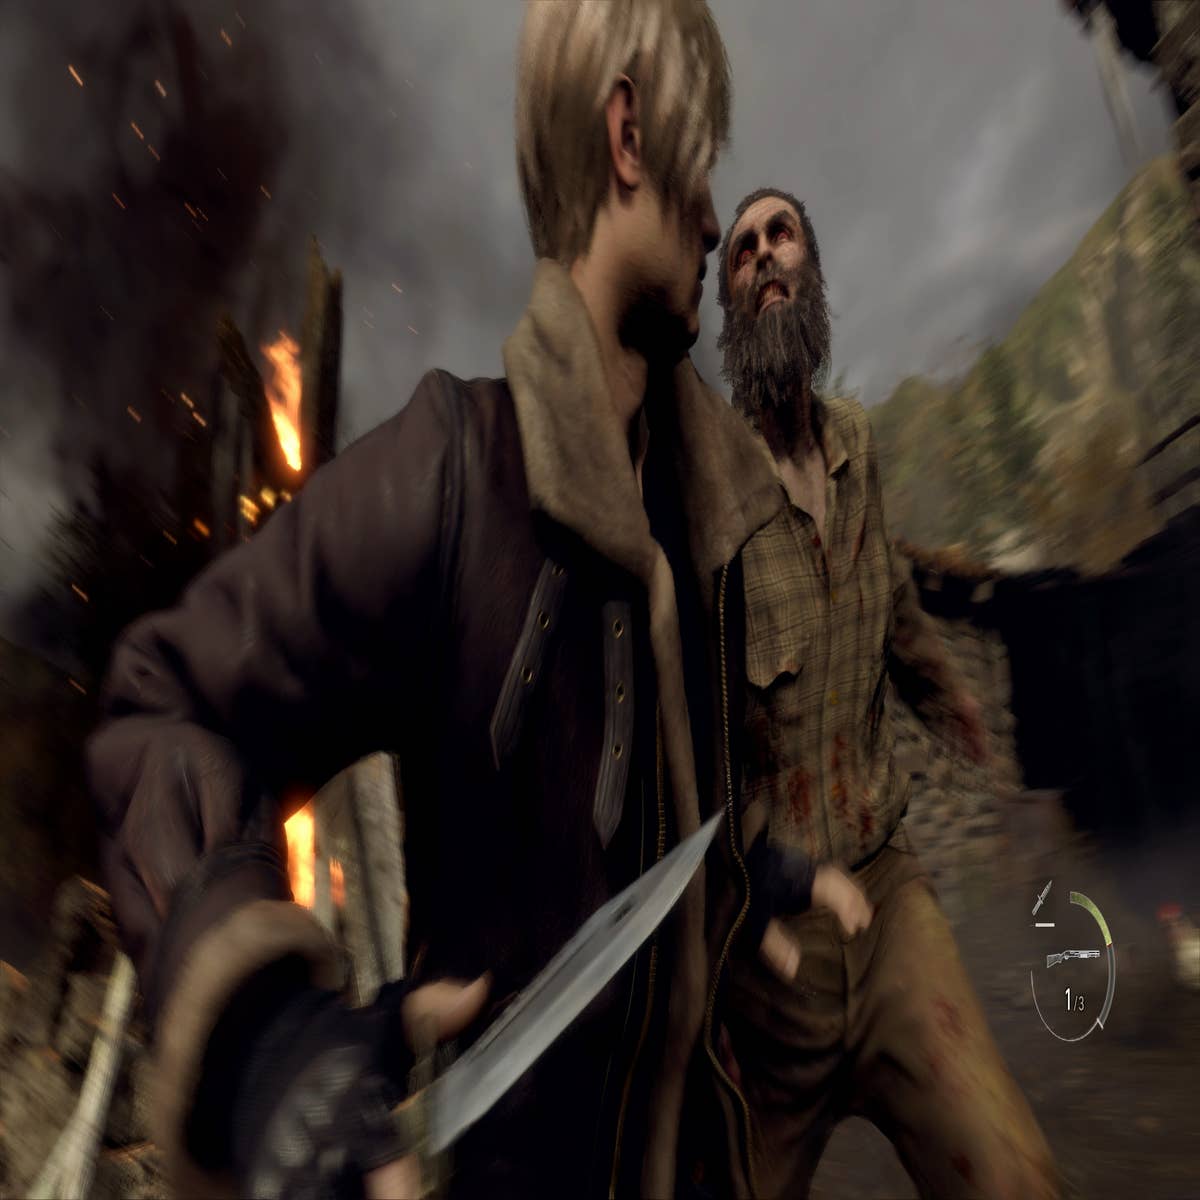 Resident Evil 4 shows remakes don't have to be fully faithful